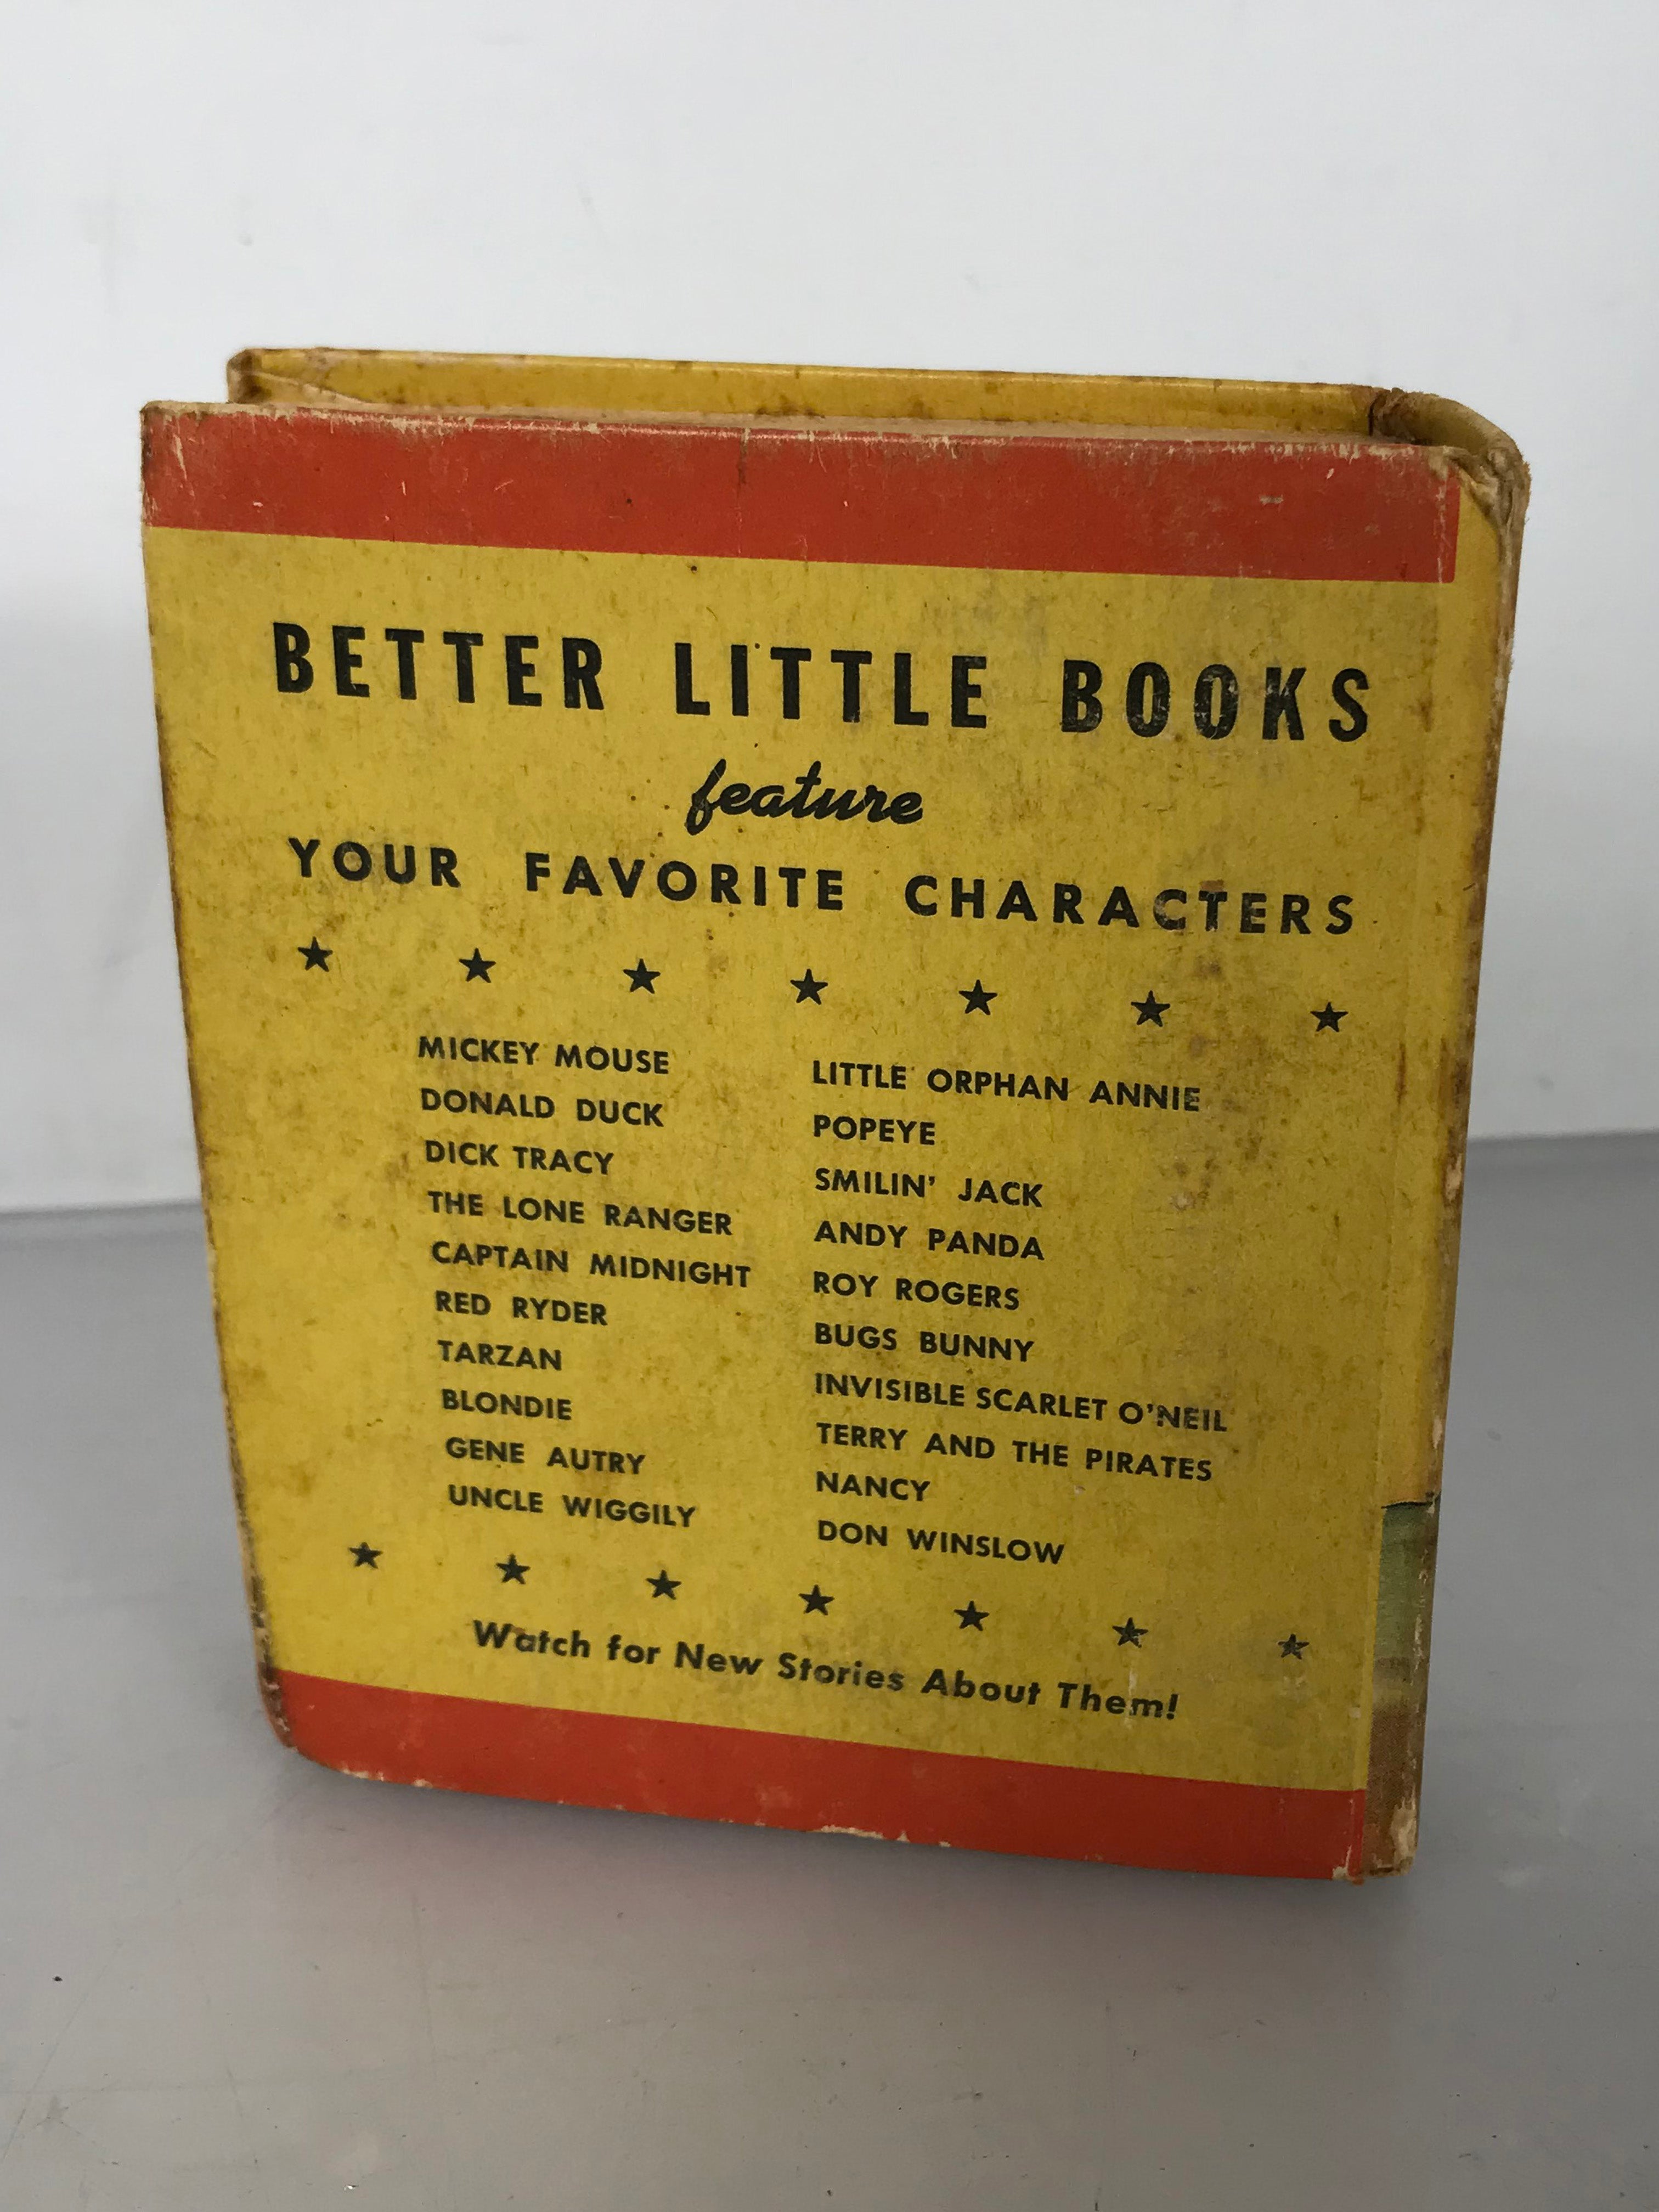 Roy Rogers and the Deadly Treasure 1947 The Better Little Book 1437